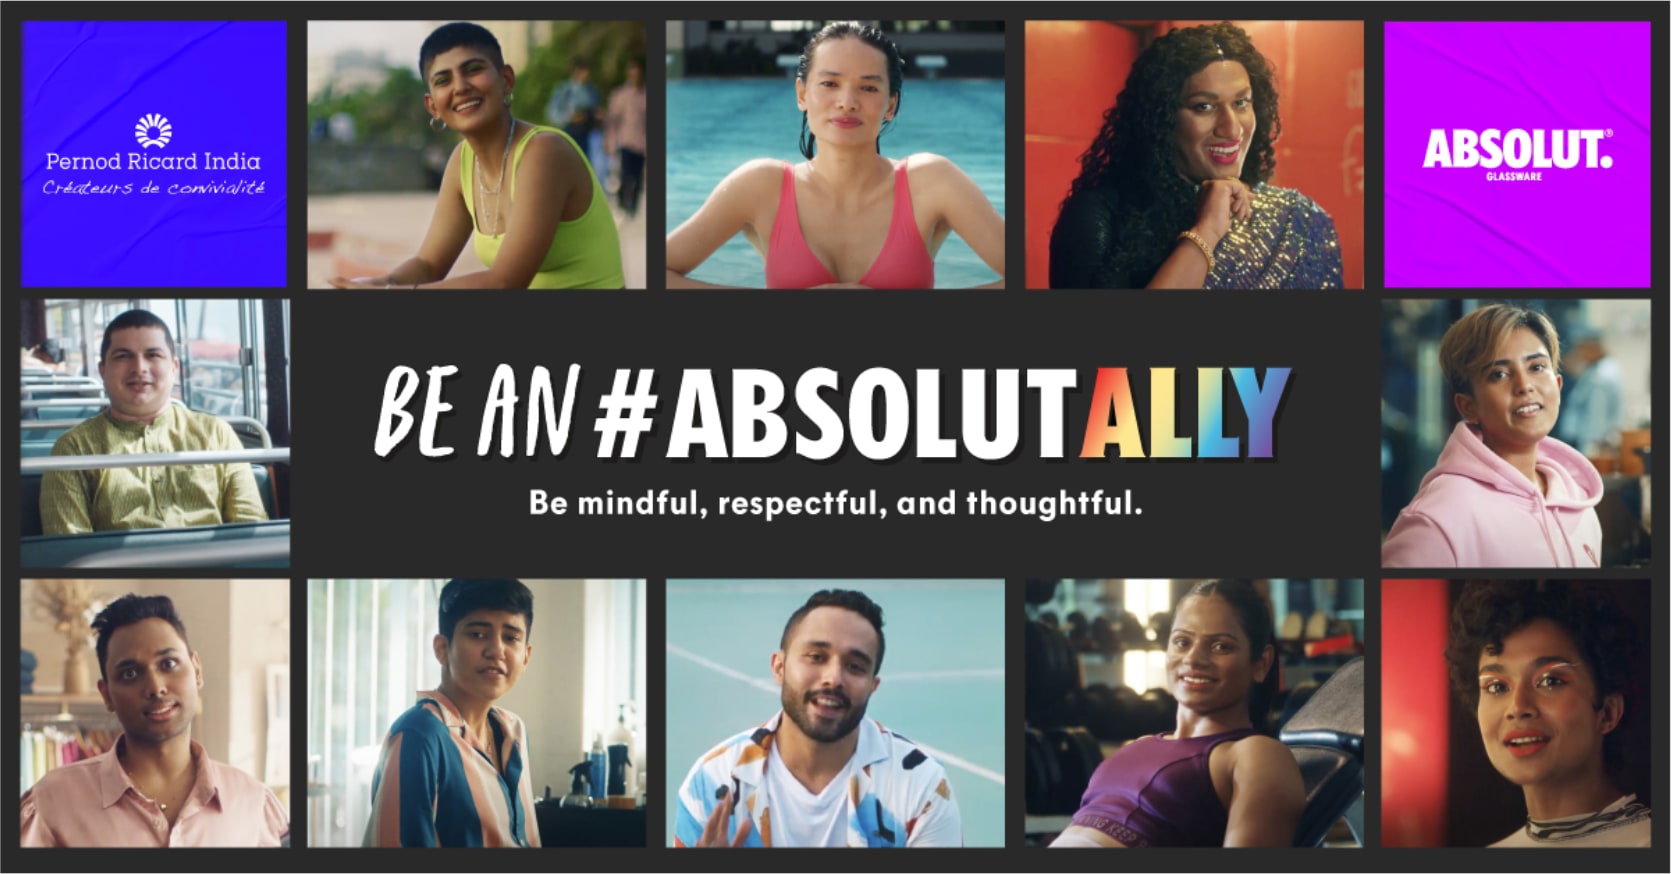 Be an #AbsolutAlly